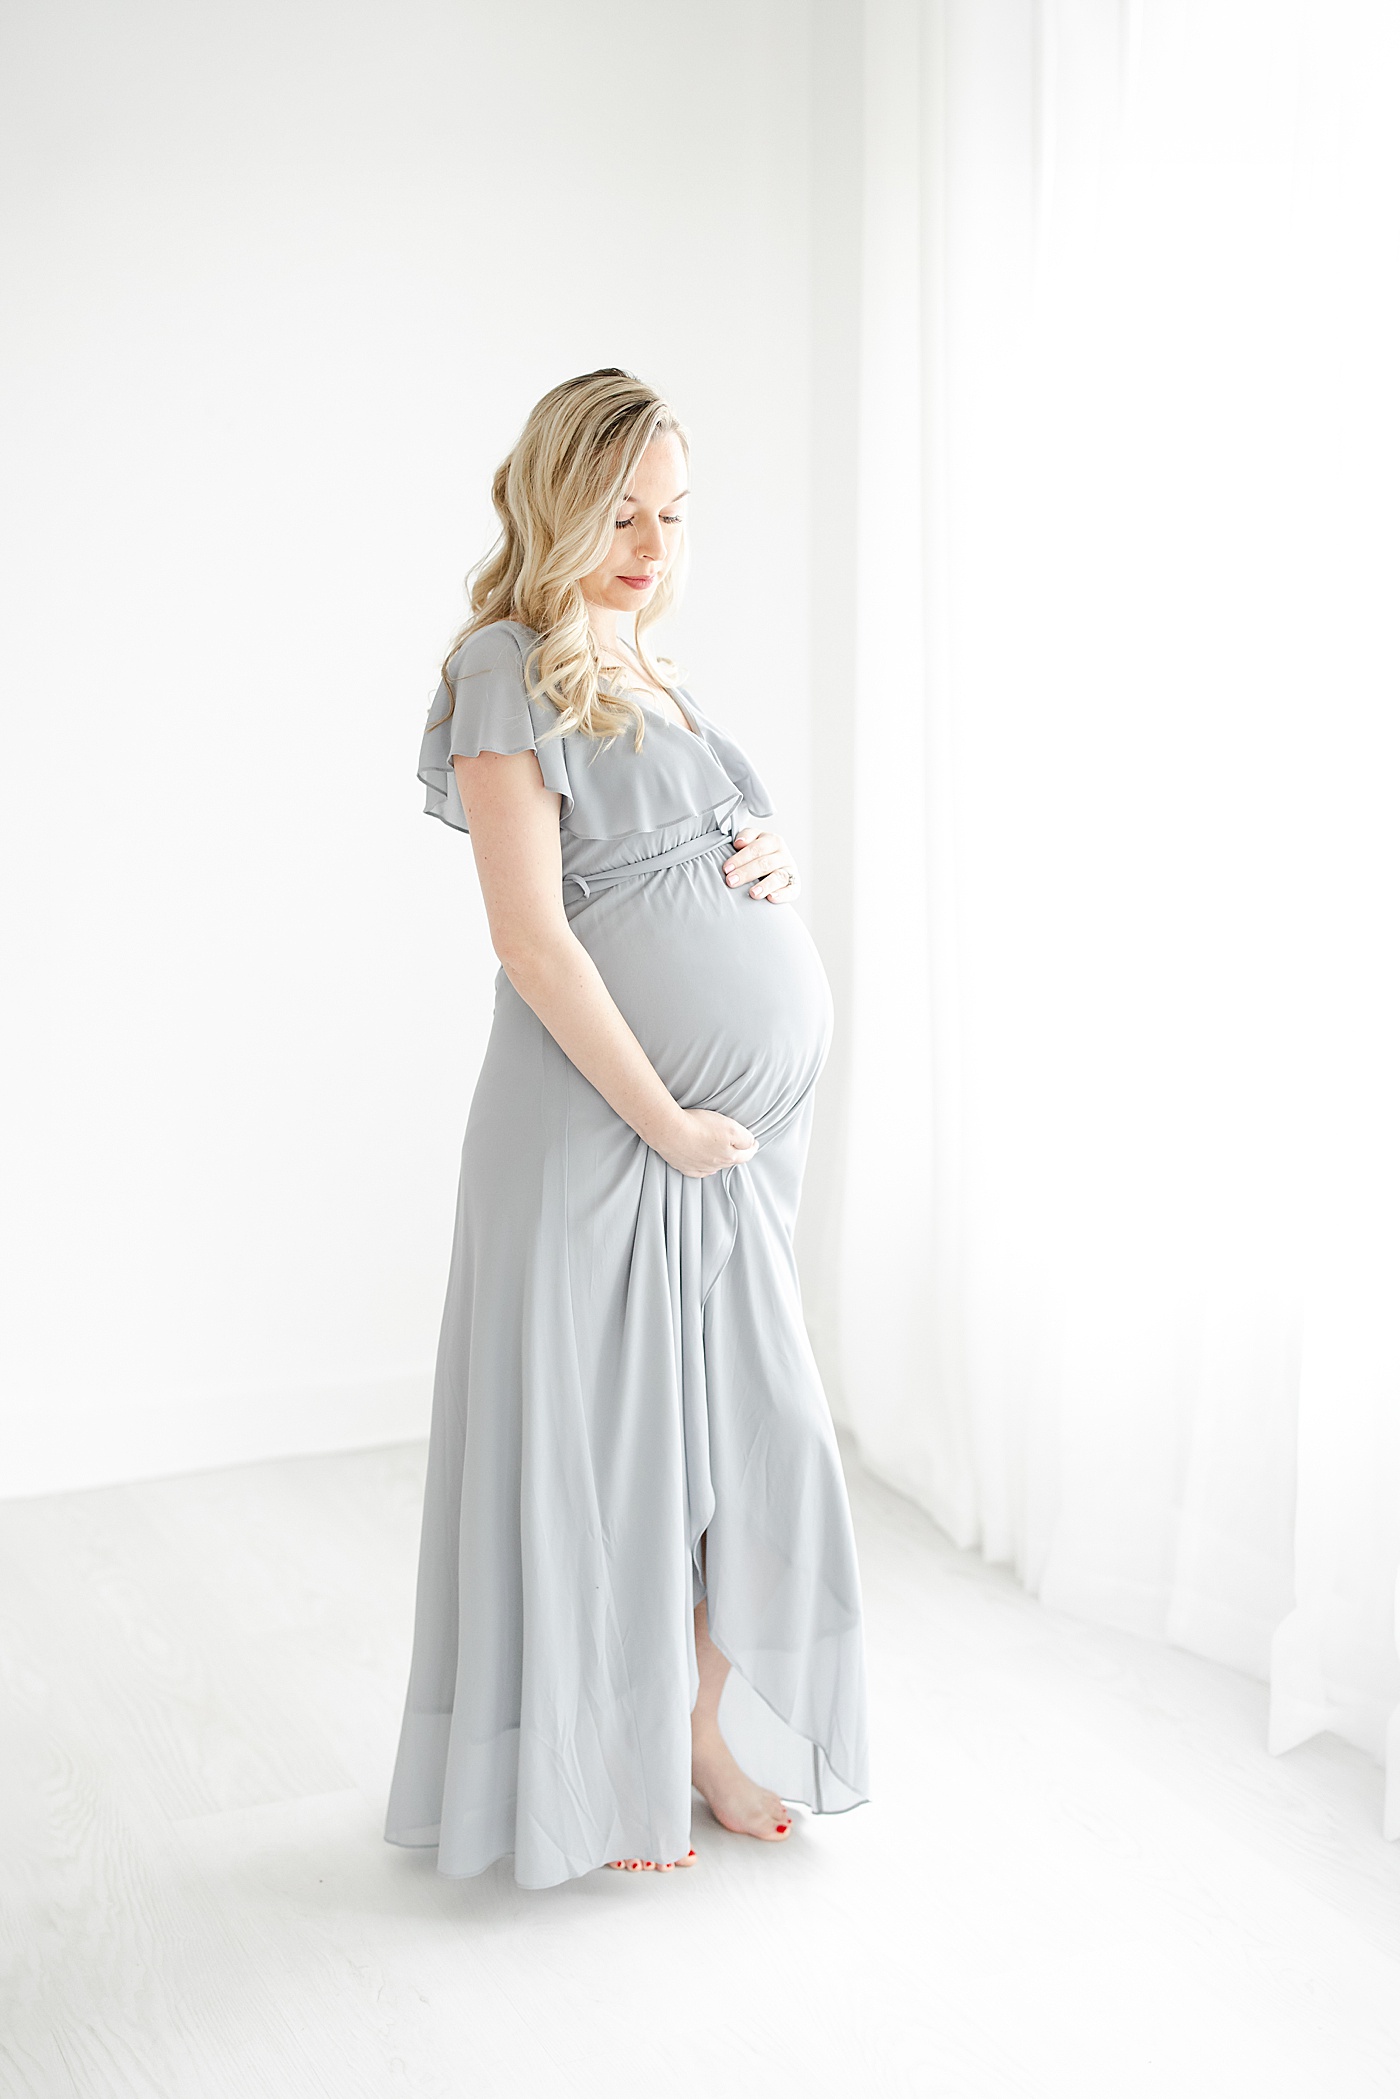 5 Reasons Why You Should Take Maternity Photos | Kristin Wood Photography